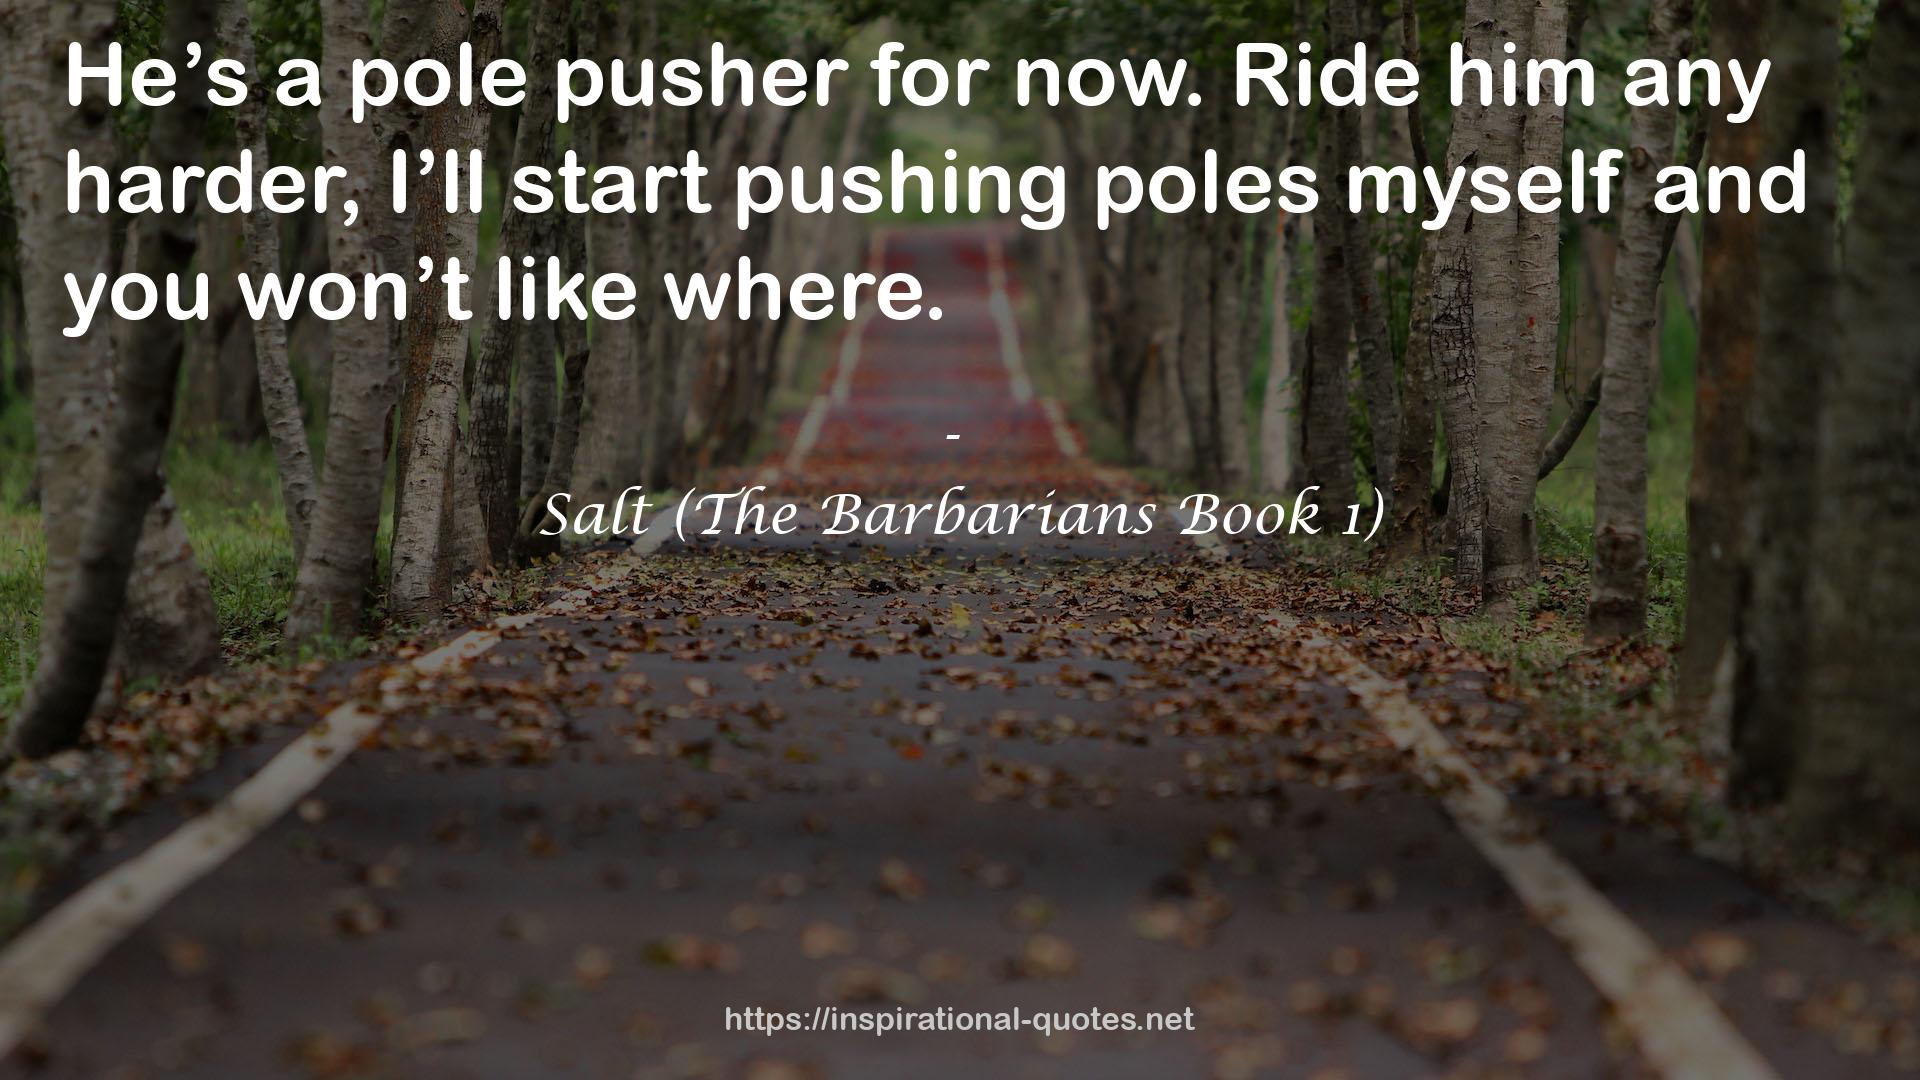 Salt (The Barbarians Book 1) QUOTES